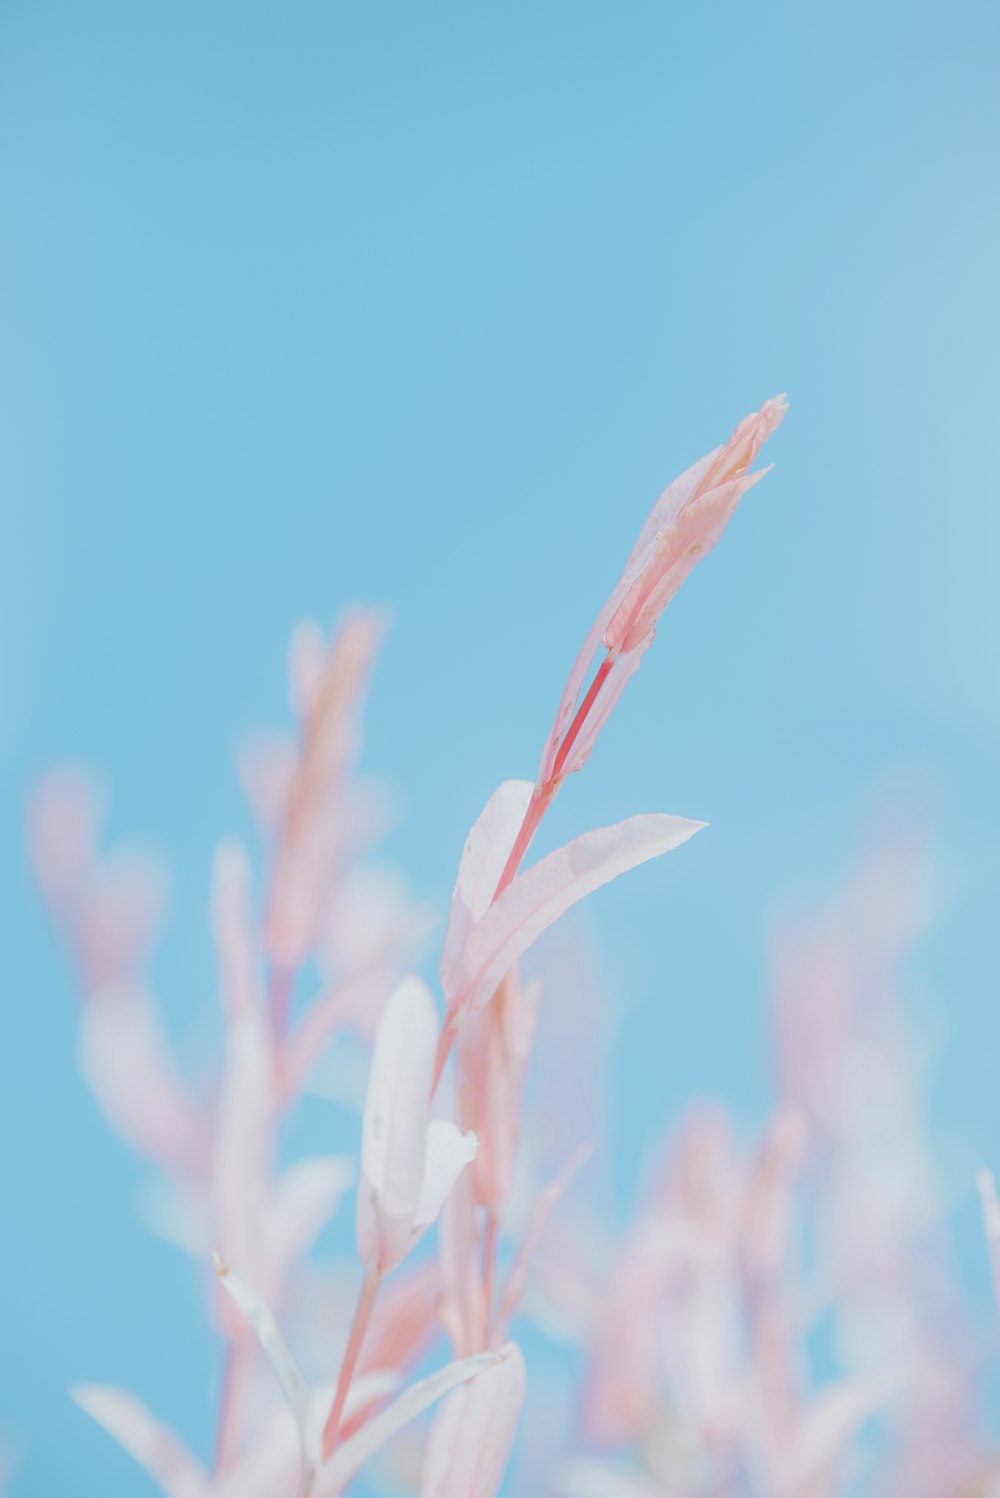 a blurry photo of a plant with pink flowers